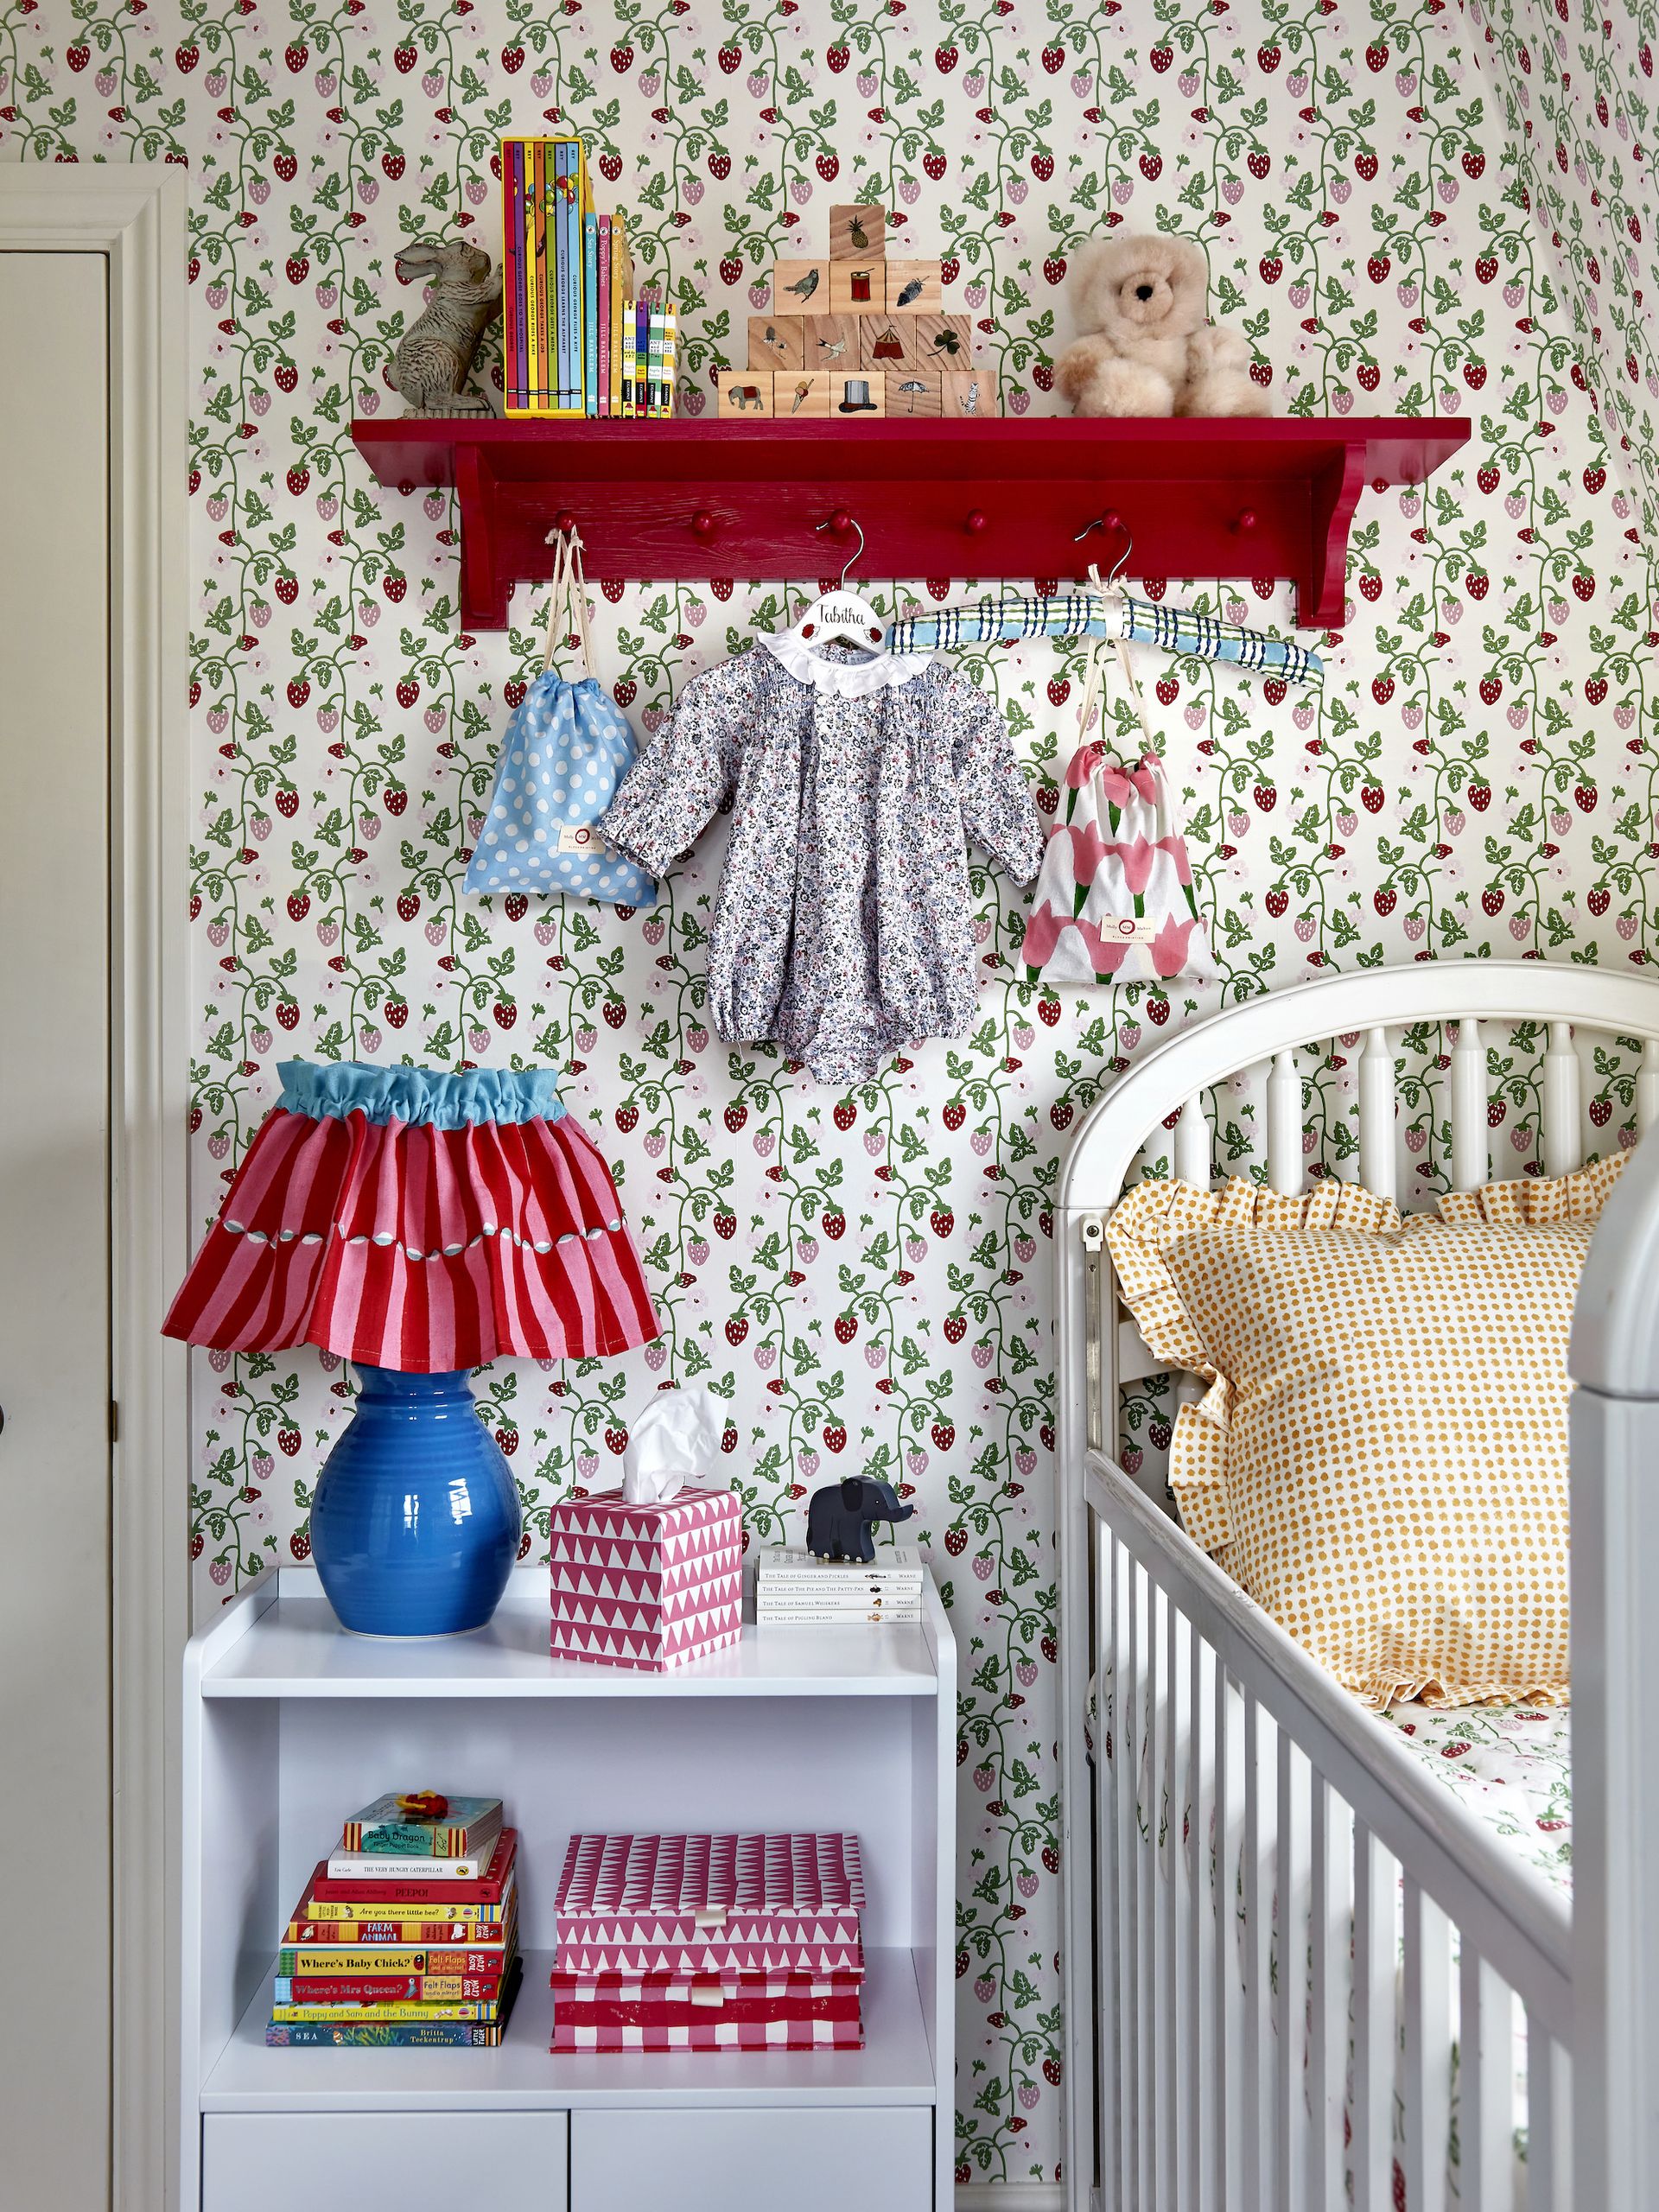 <p>                     Wallpaper is a wonderful way to add color, pattern and interest to your baby girl's nursery. Find a wallpaper that you also love and go wild with it.                   </p>                                      <p>                     'Nothing is more nostalgic than the site of sweet, fresh strawberries and their climbing grass green shoots,' says Molly Mahon, textile designer at Molly Mahon. 'This timeless design with its textural surface has such character that can last throughout a childhood and beyond! The bright pops of color make it easy to coordinate lighting and cushions to create a joyful, playful space.'                   </p>